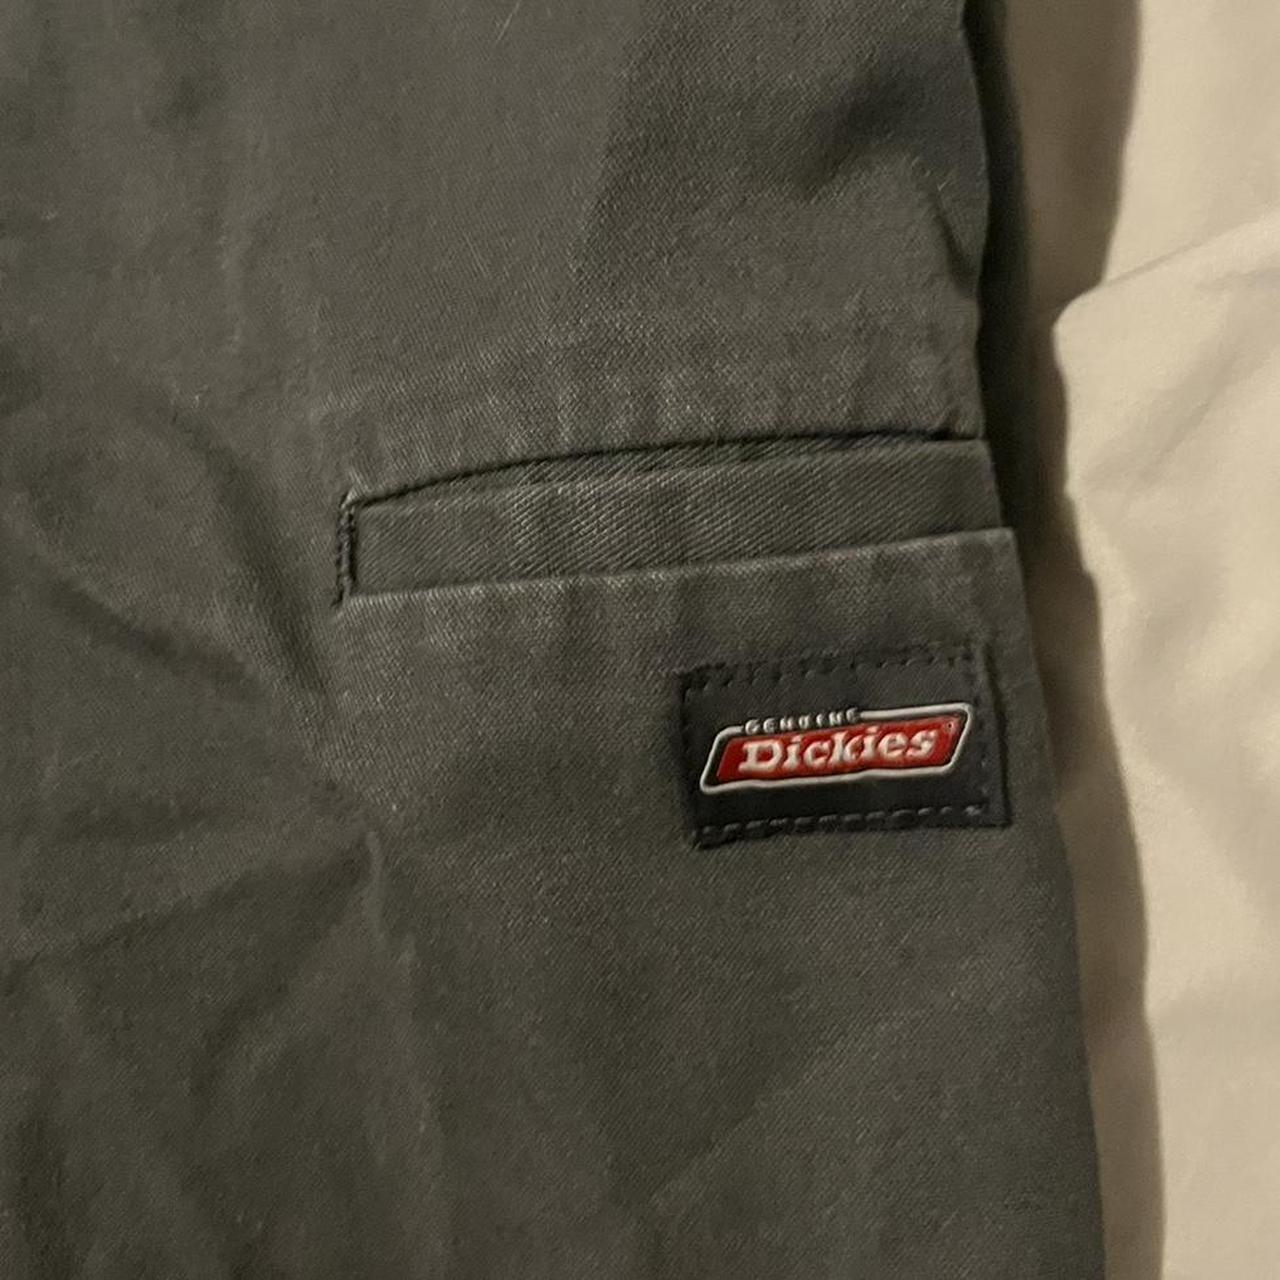 DICKIES JORTS! crazy baggy fit to them not my style... - Depop